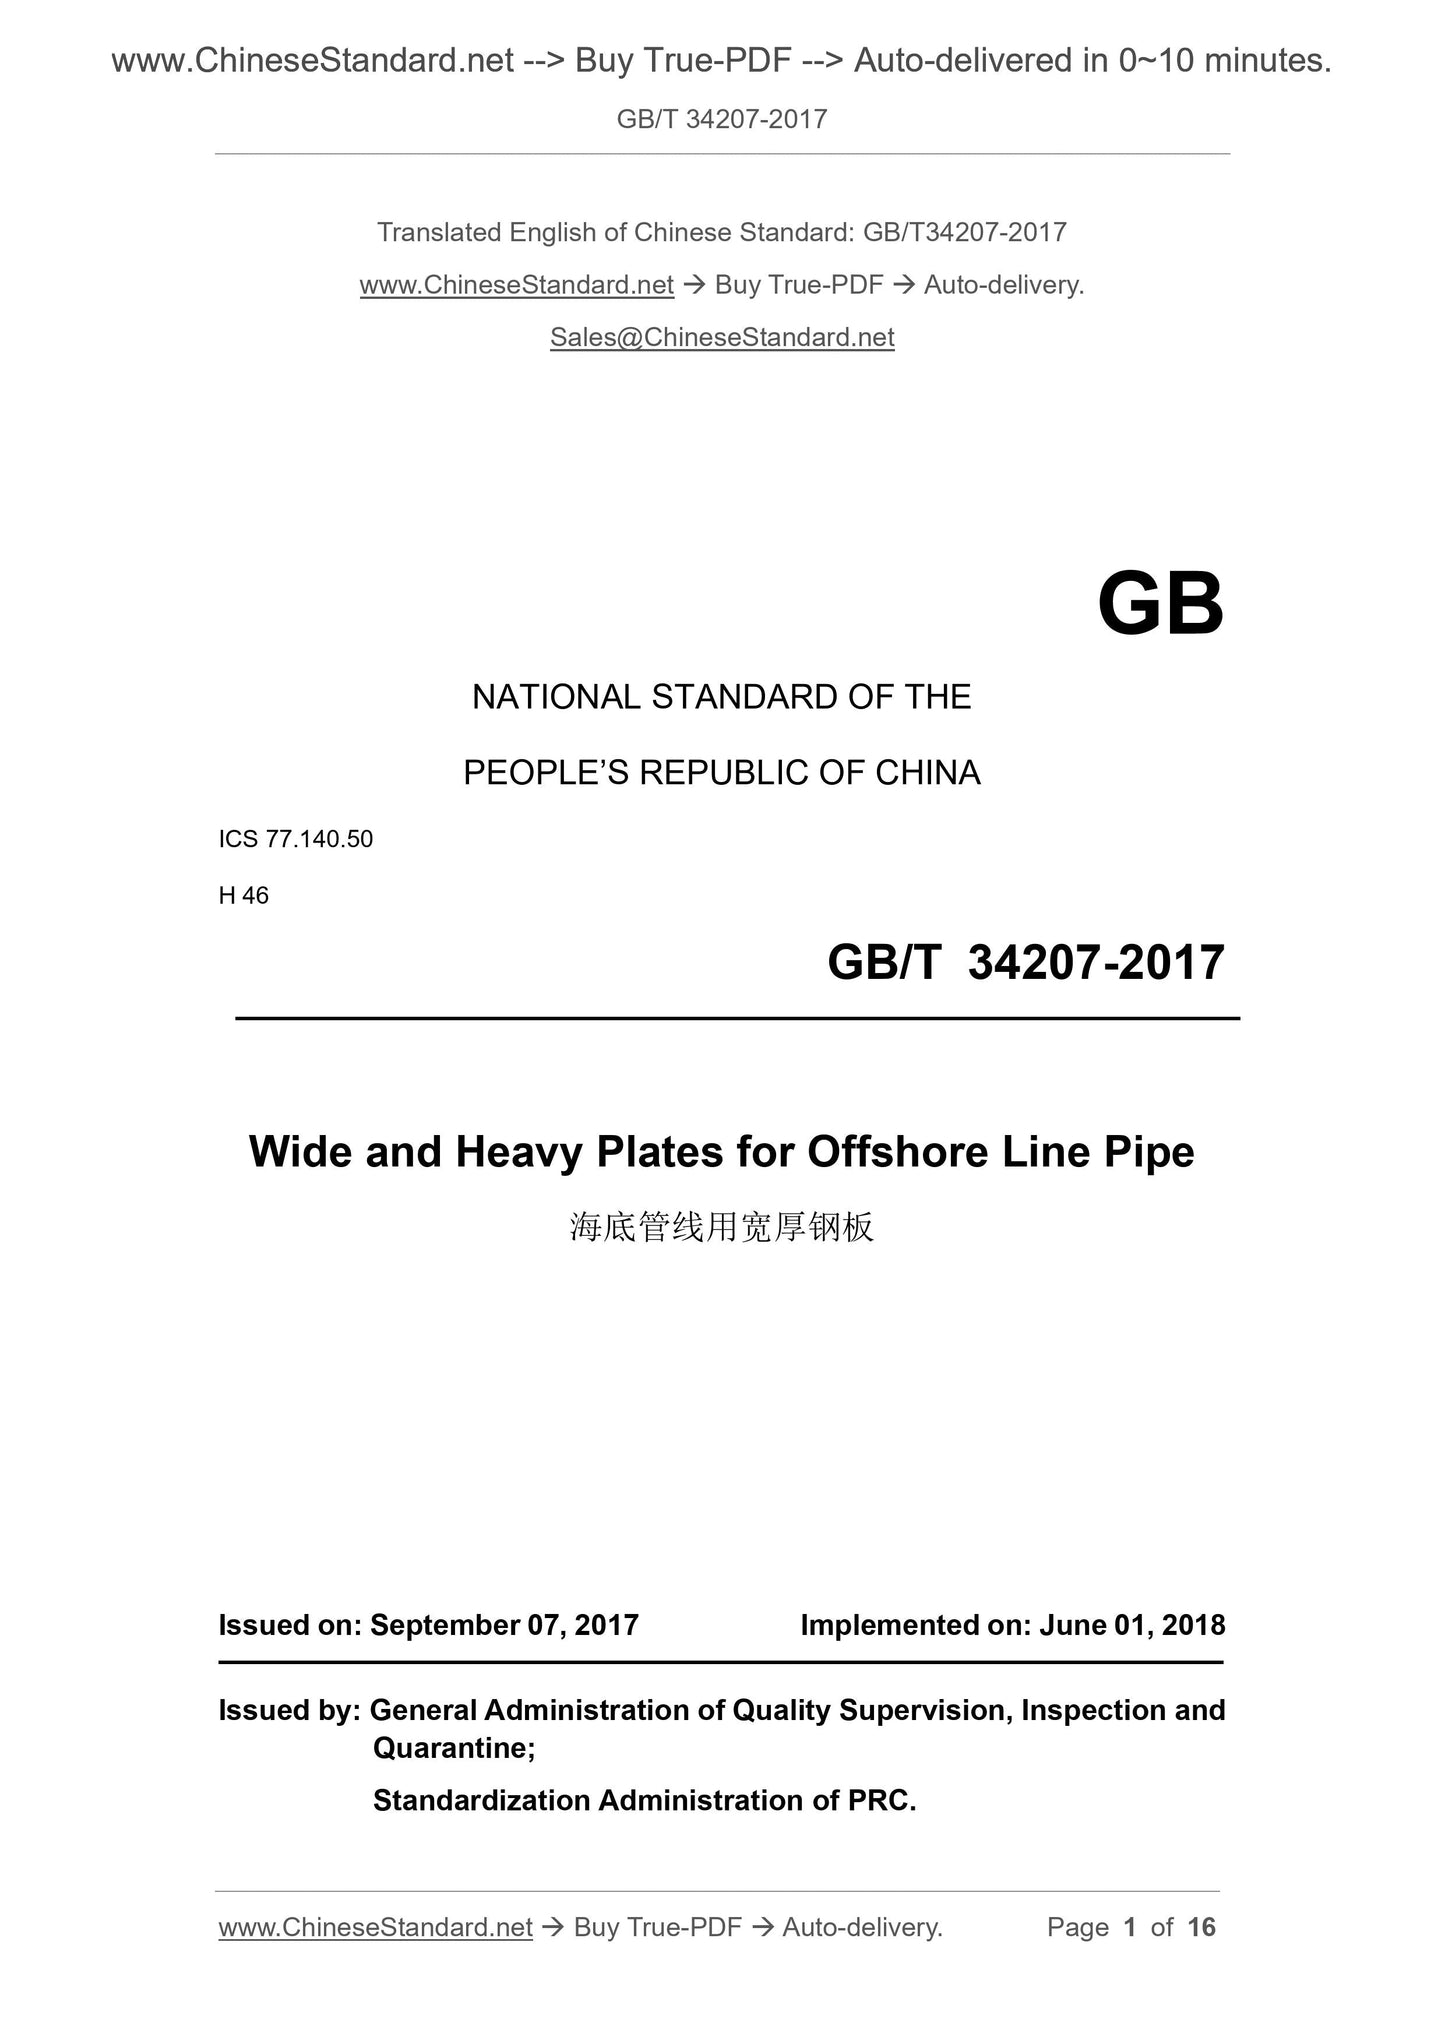 GB/T 34207-2017 Page 1